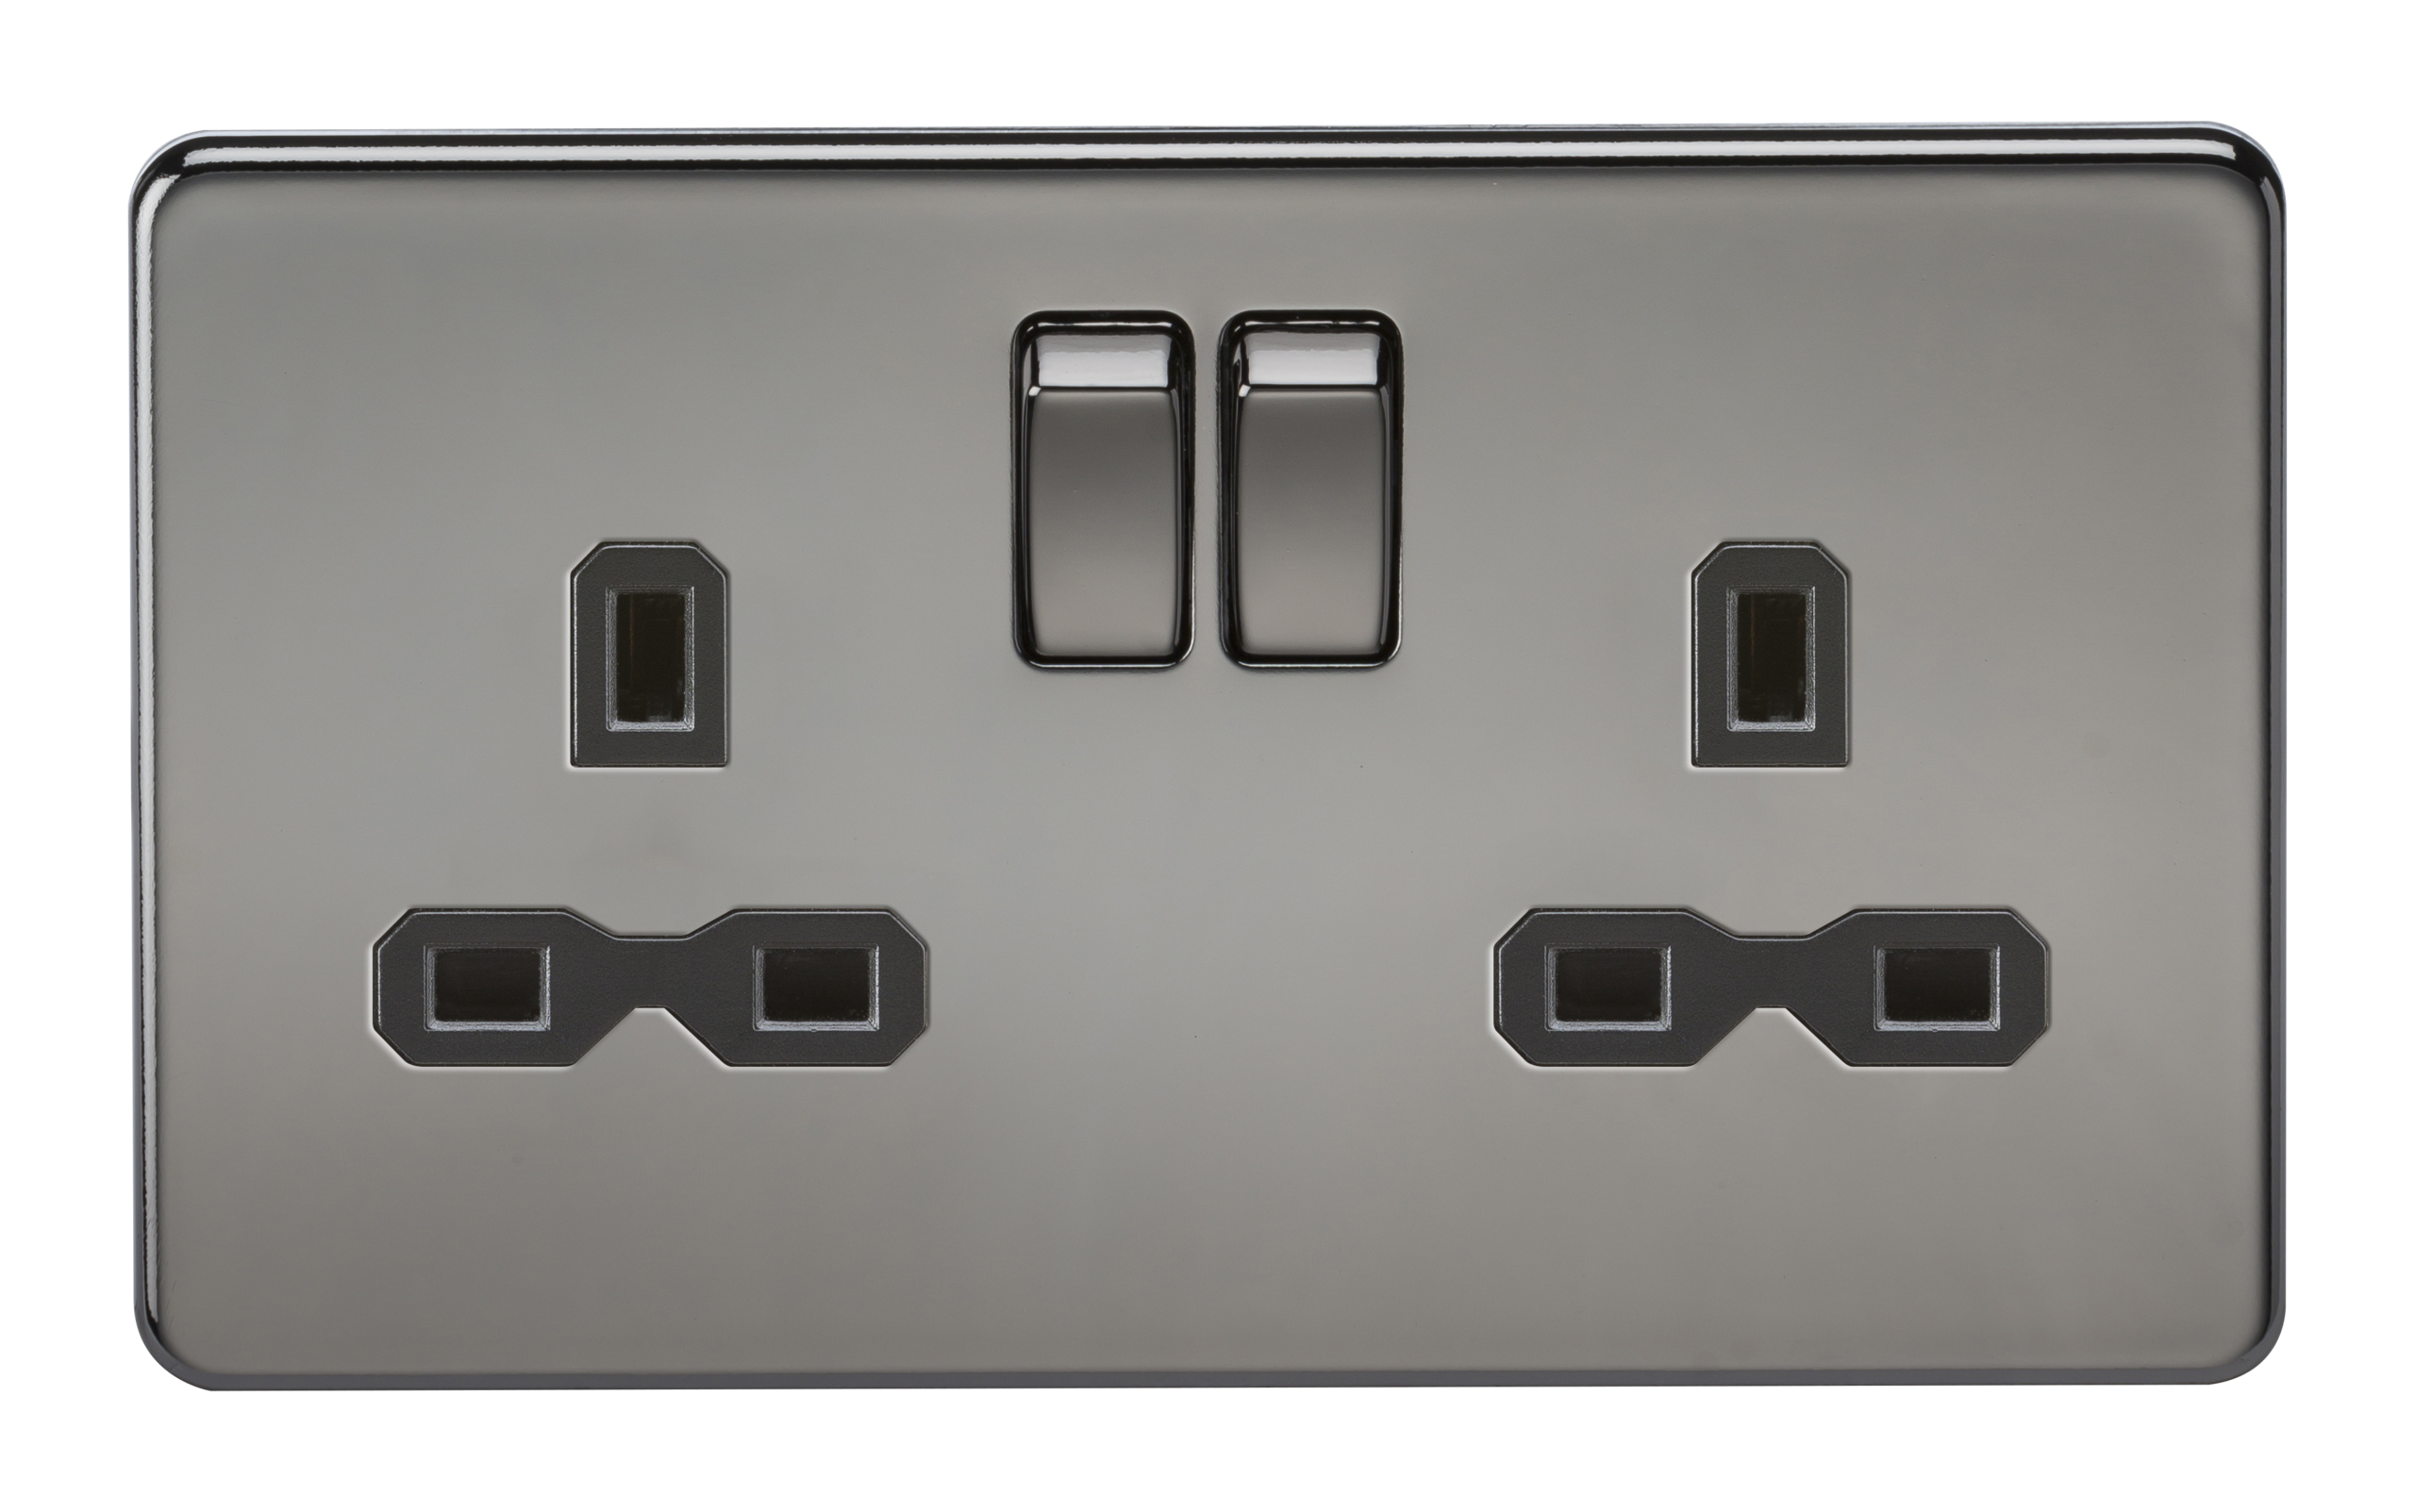 Screwless 13A 2G DP Switched Socket - Black Nickel With Black Insert - SFR9000BN 